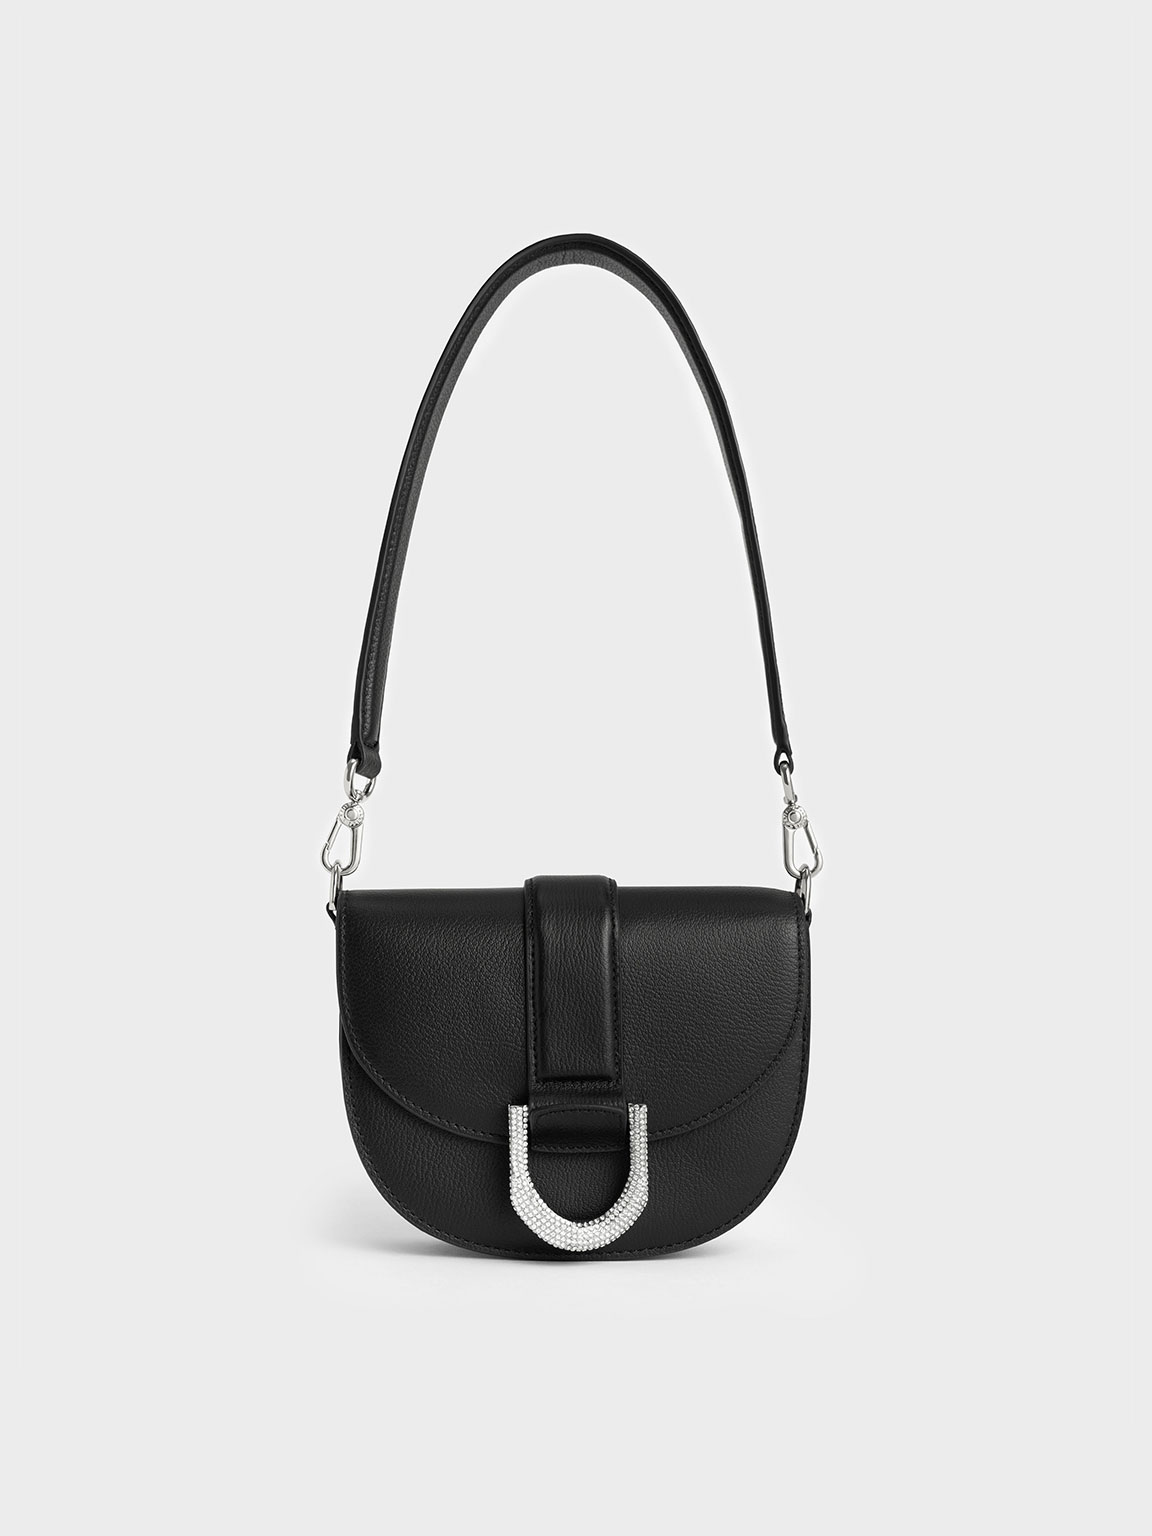 White leather Christian Dior Saddle bag with silver-tone hardware